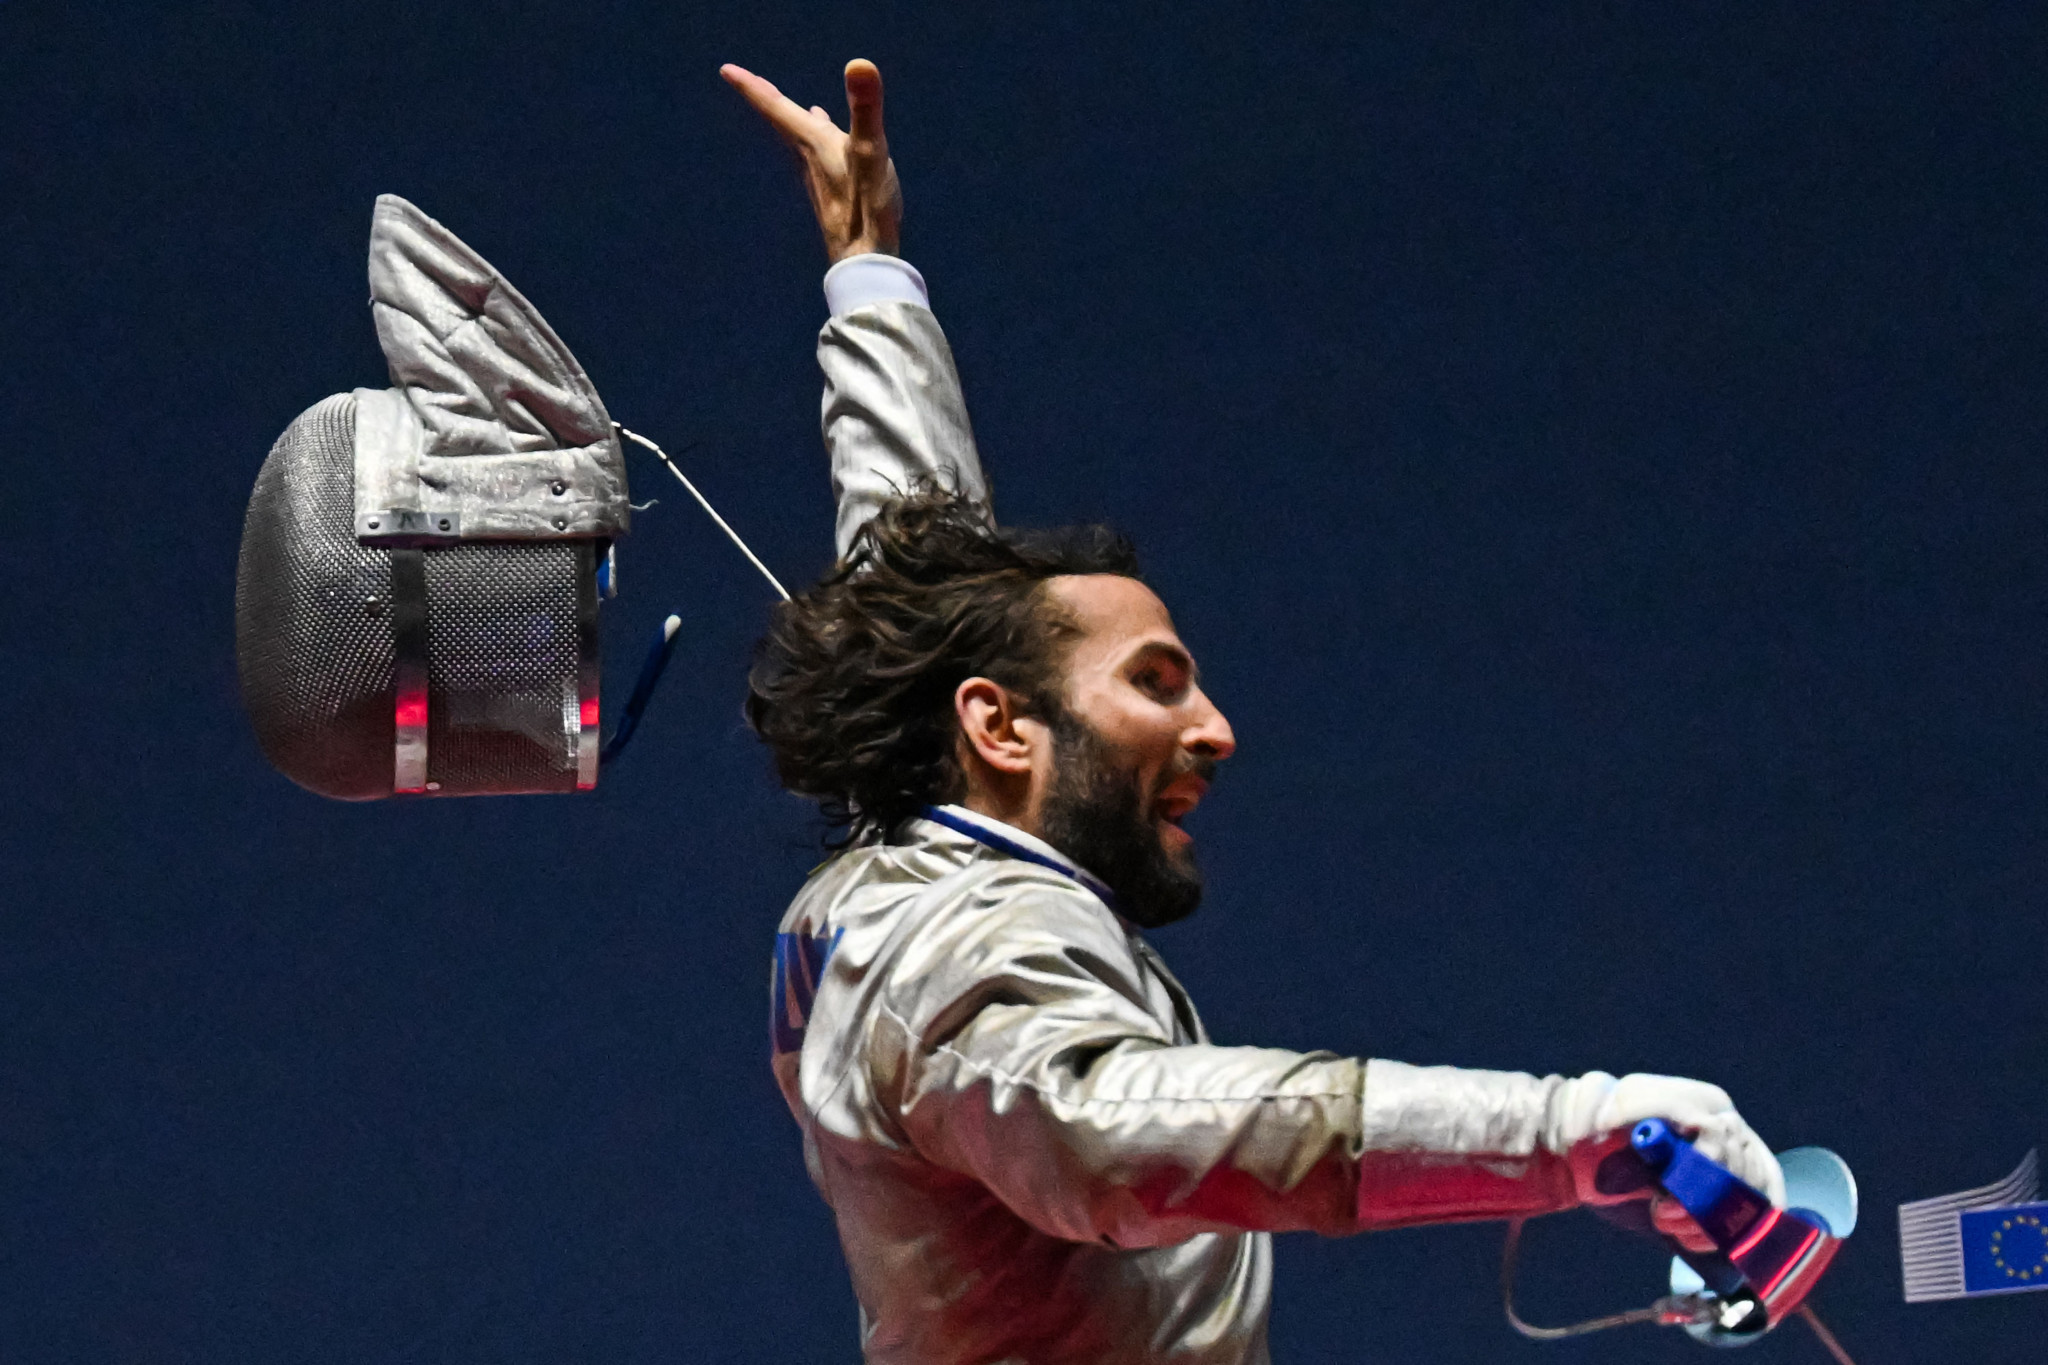 Hungarian fencer Aron Szilagyi is eyeing a fourth gold medal at Paris 2024. GETTY IMAGES